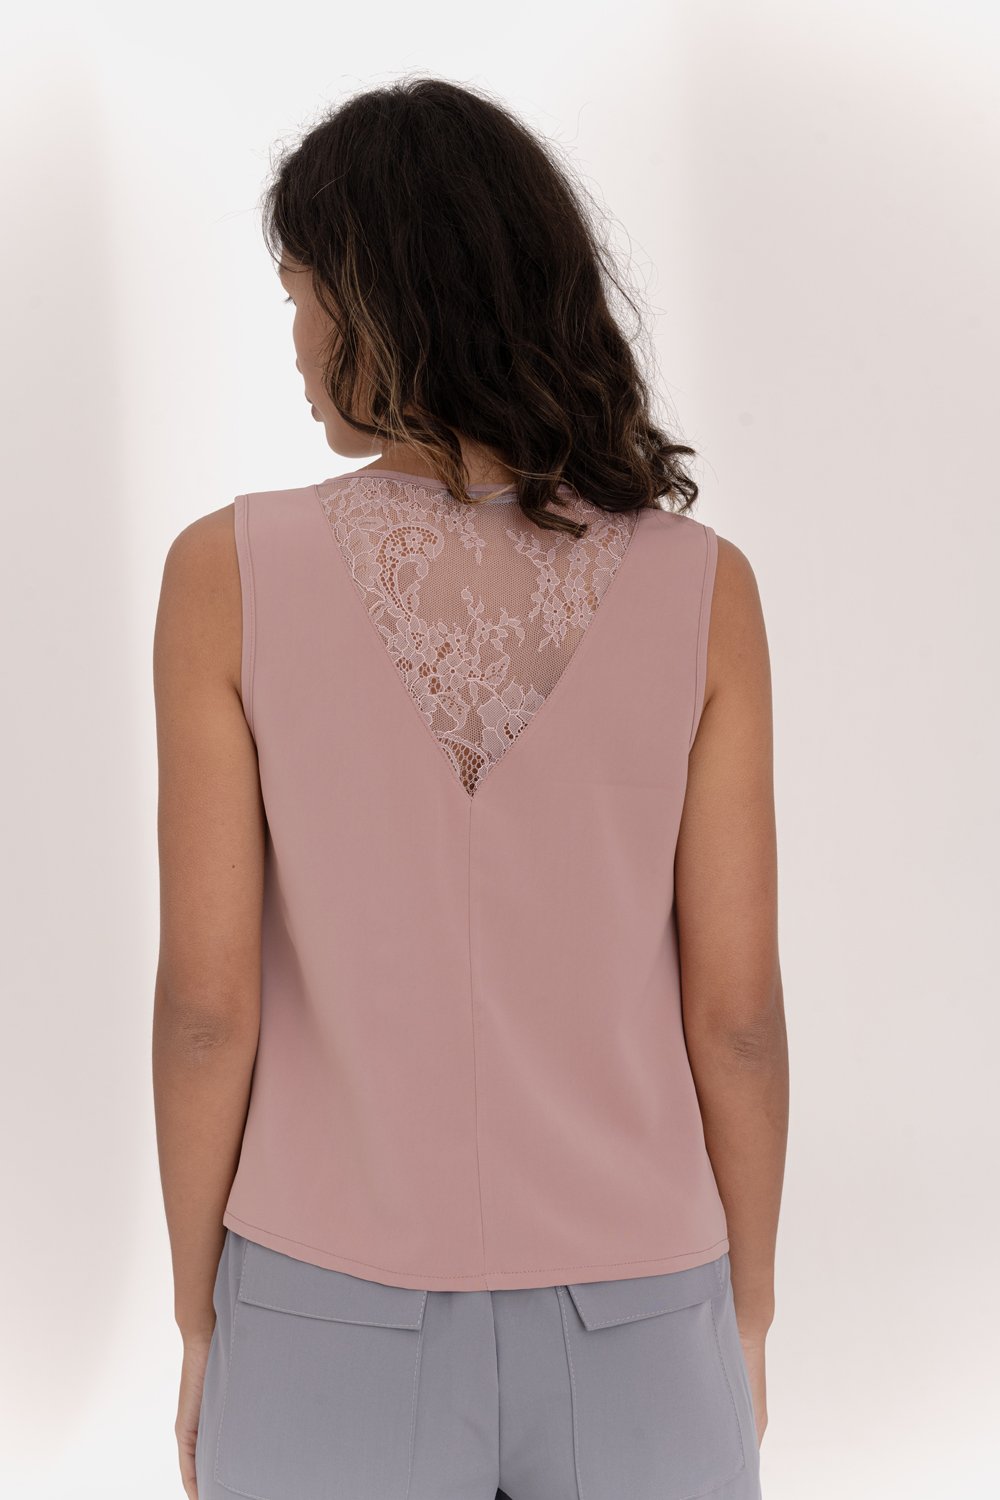 Pink sleeveless top with lace insert on the back